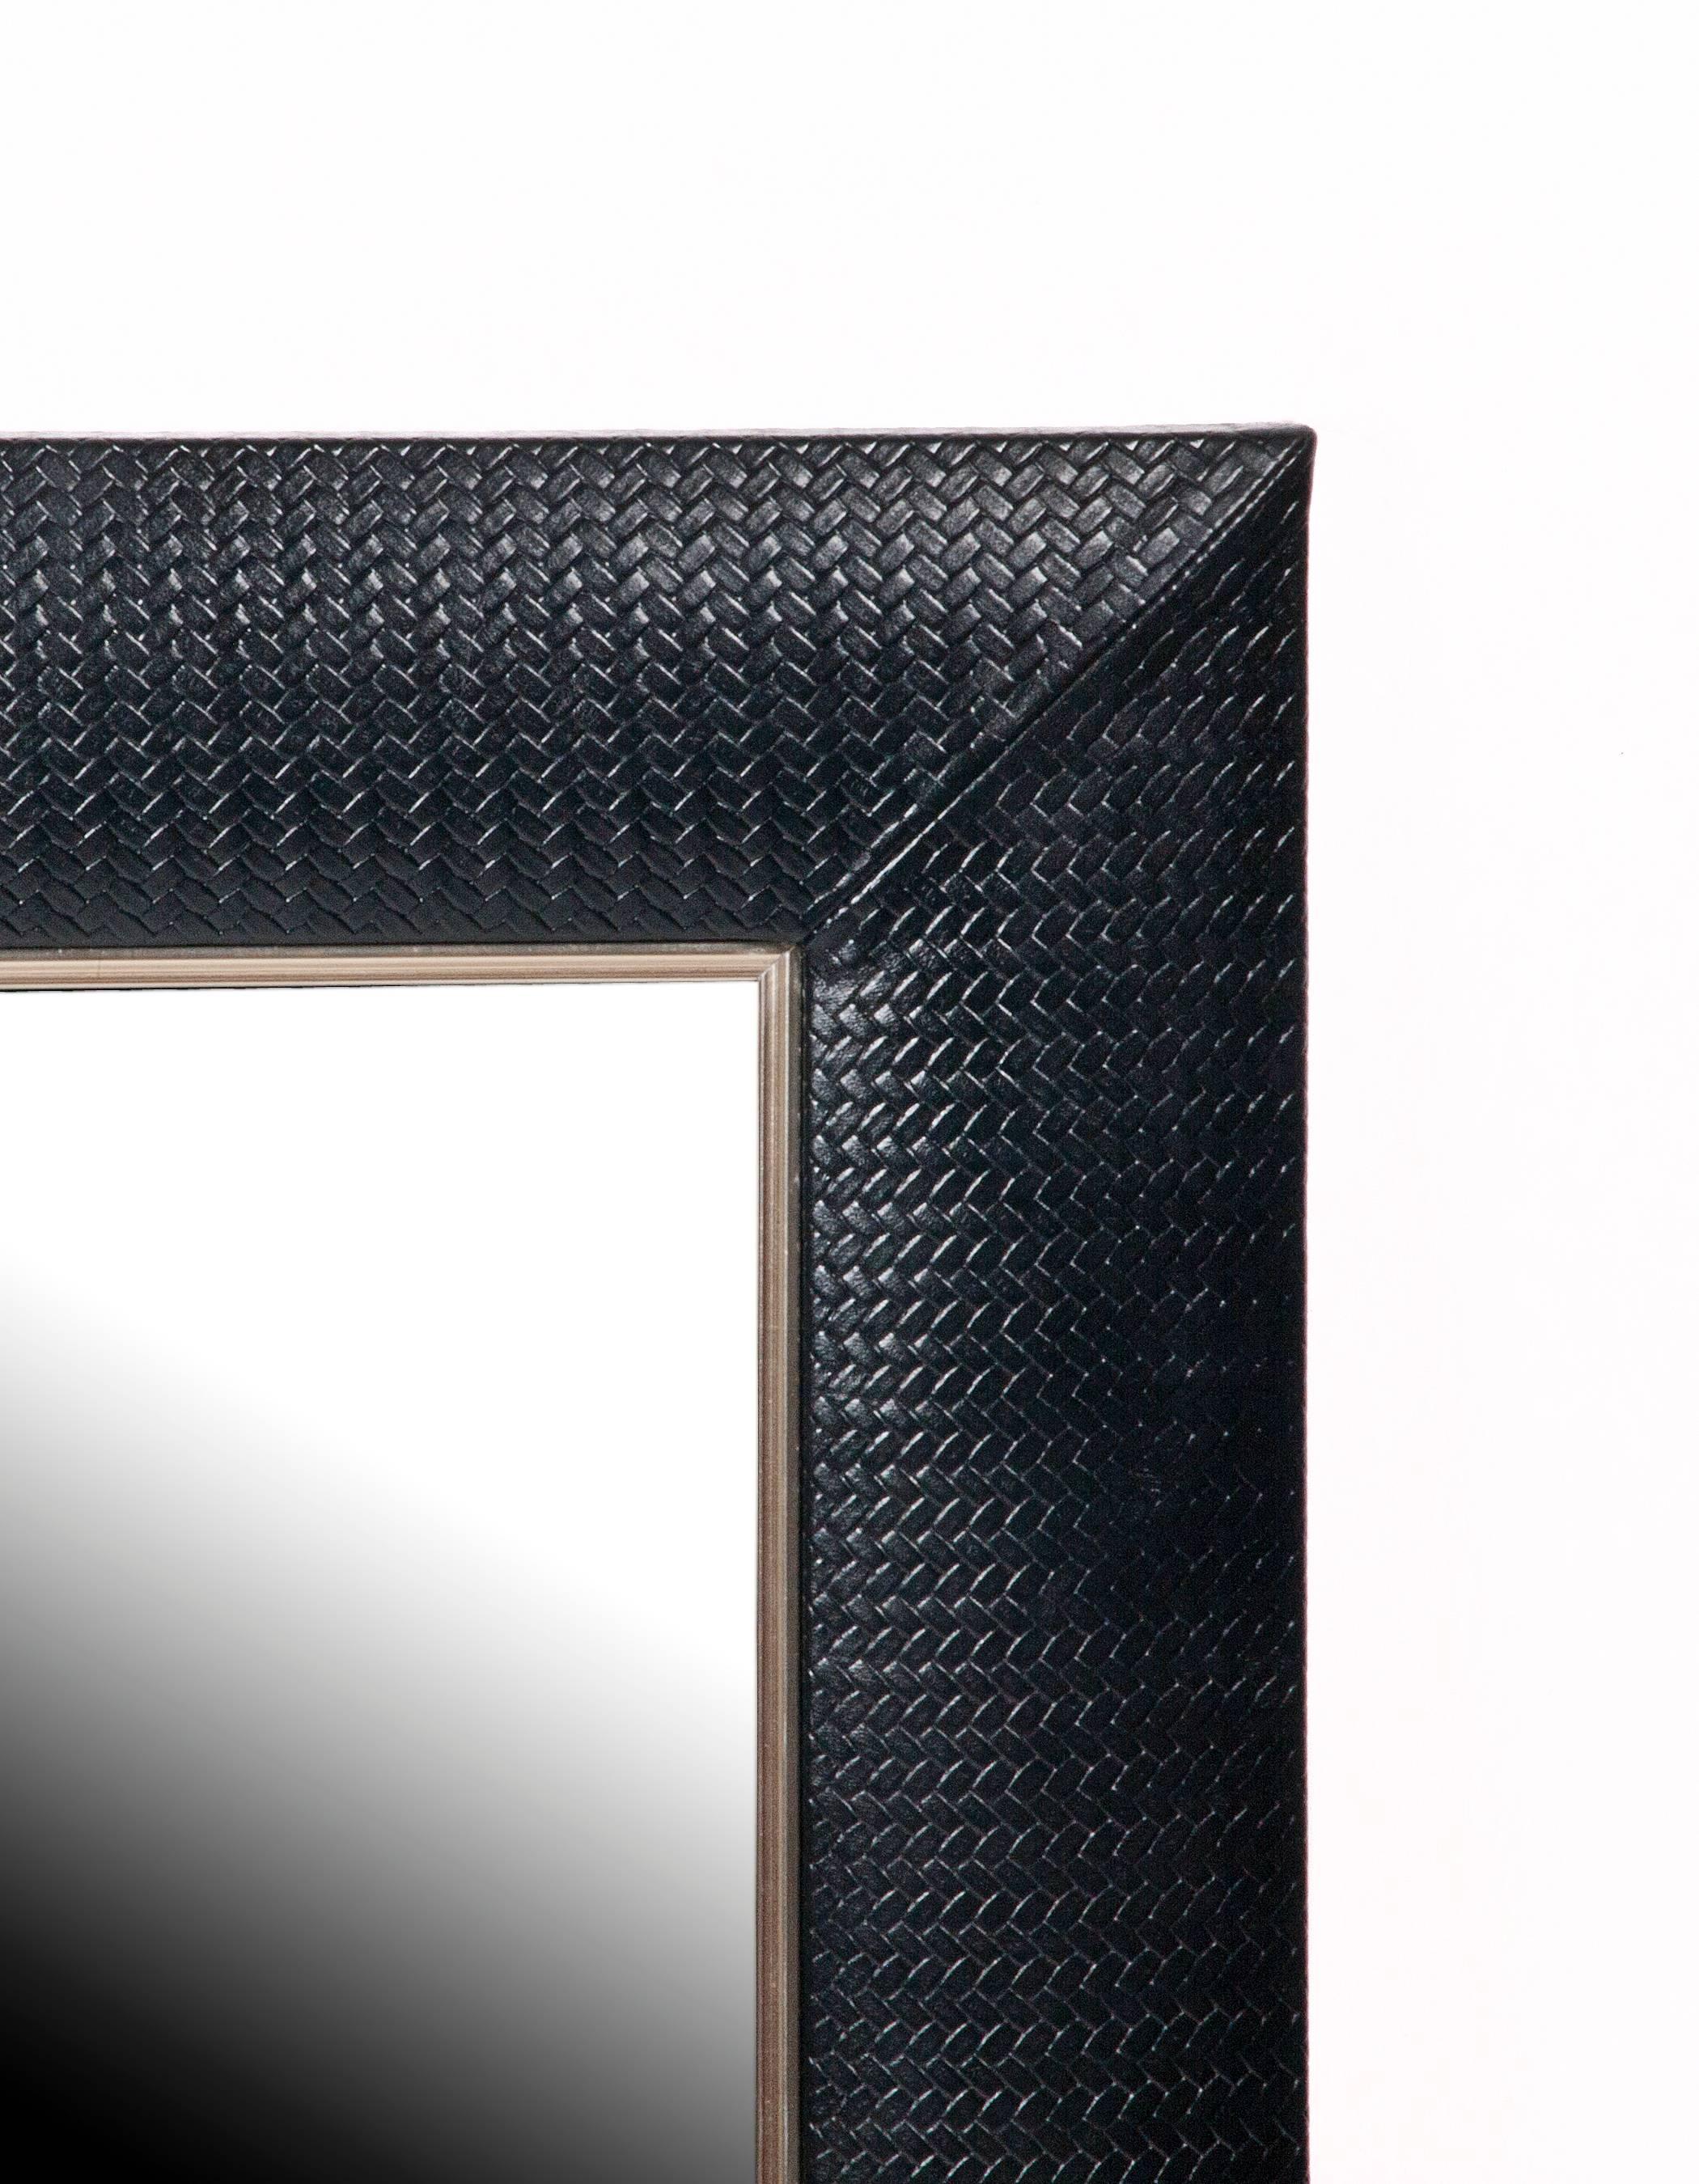 Contemporary nero embossed weave leather framed mirror by Klasp home

Frame measuring 28 x 32